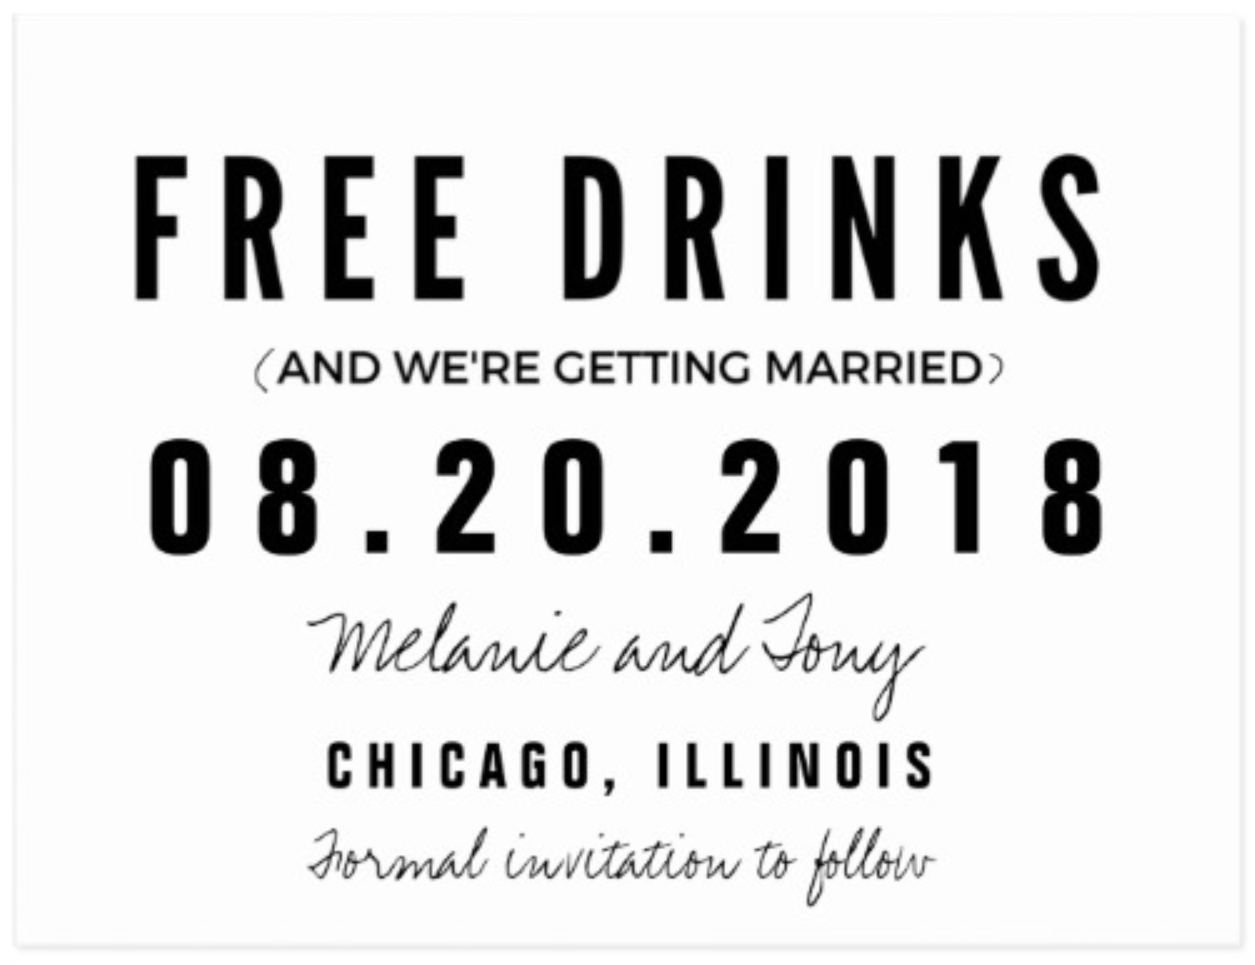 Free drinks save the date idea